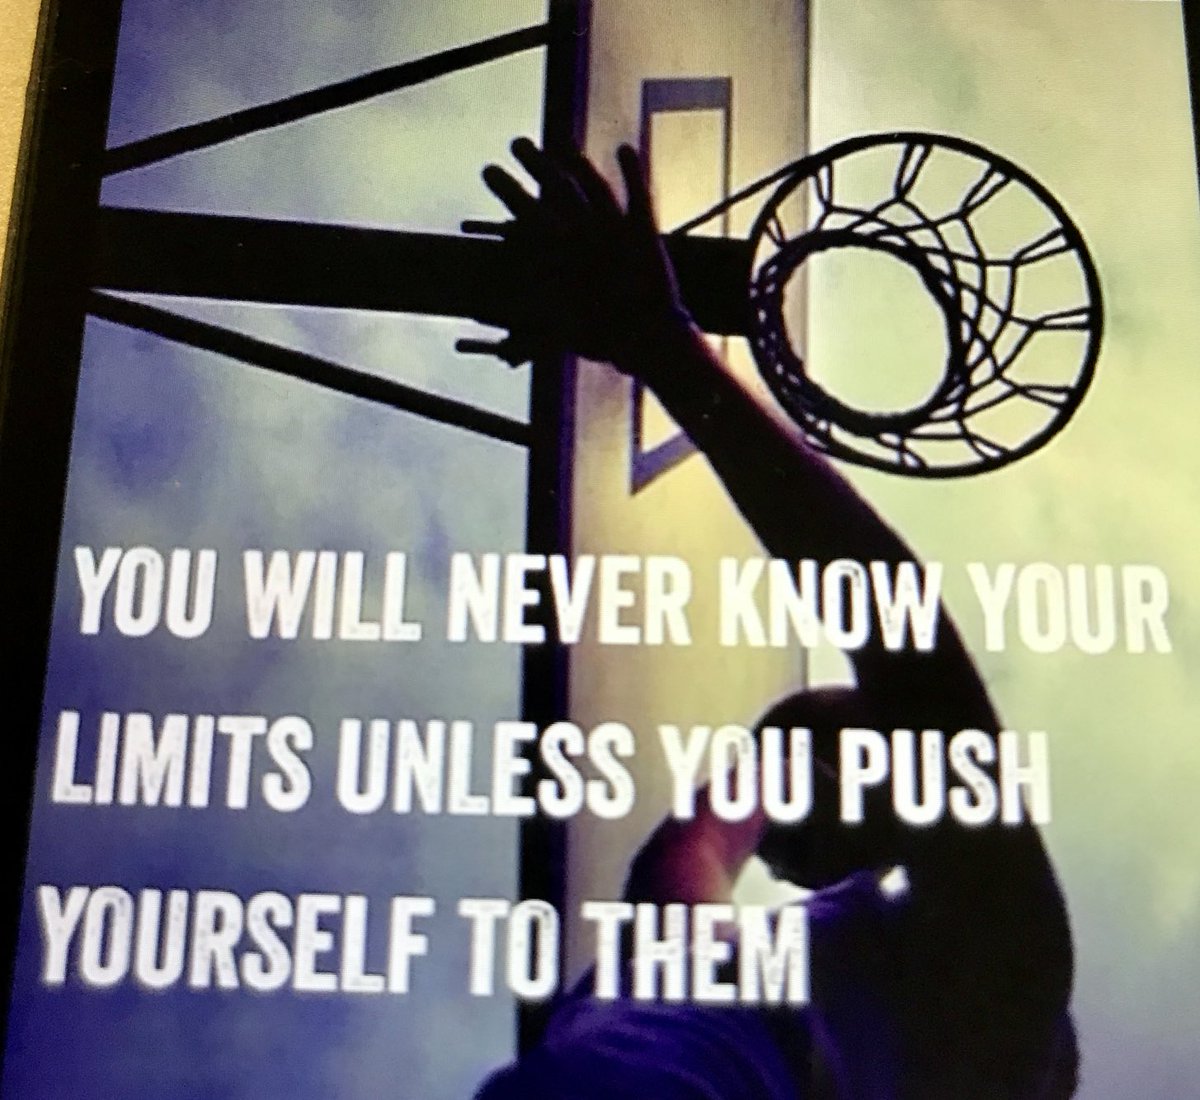 Snow Valley Basketball School will push you to your limit with great coaching by USA Basketball Licensed coaches! Find out your limits register for SV snowvalleybasketball.com/basketball/cam…